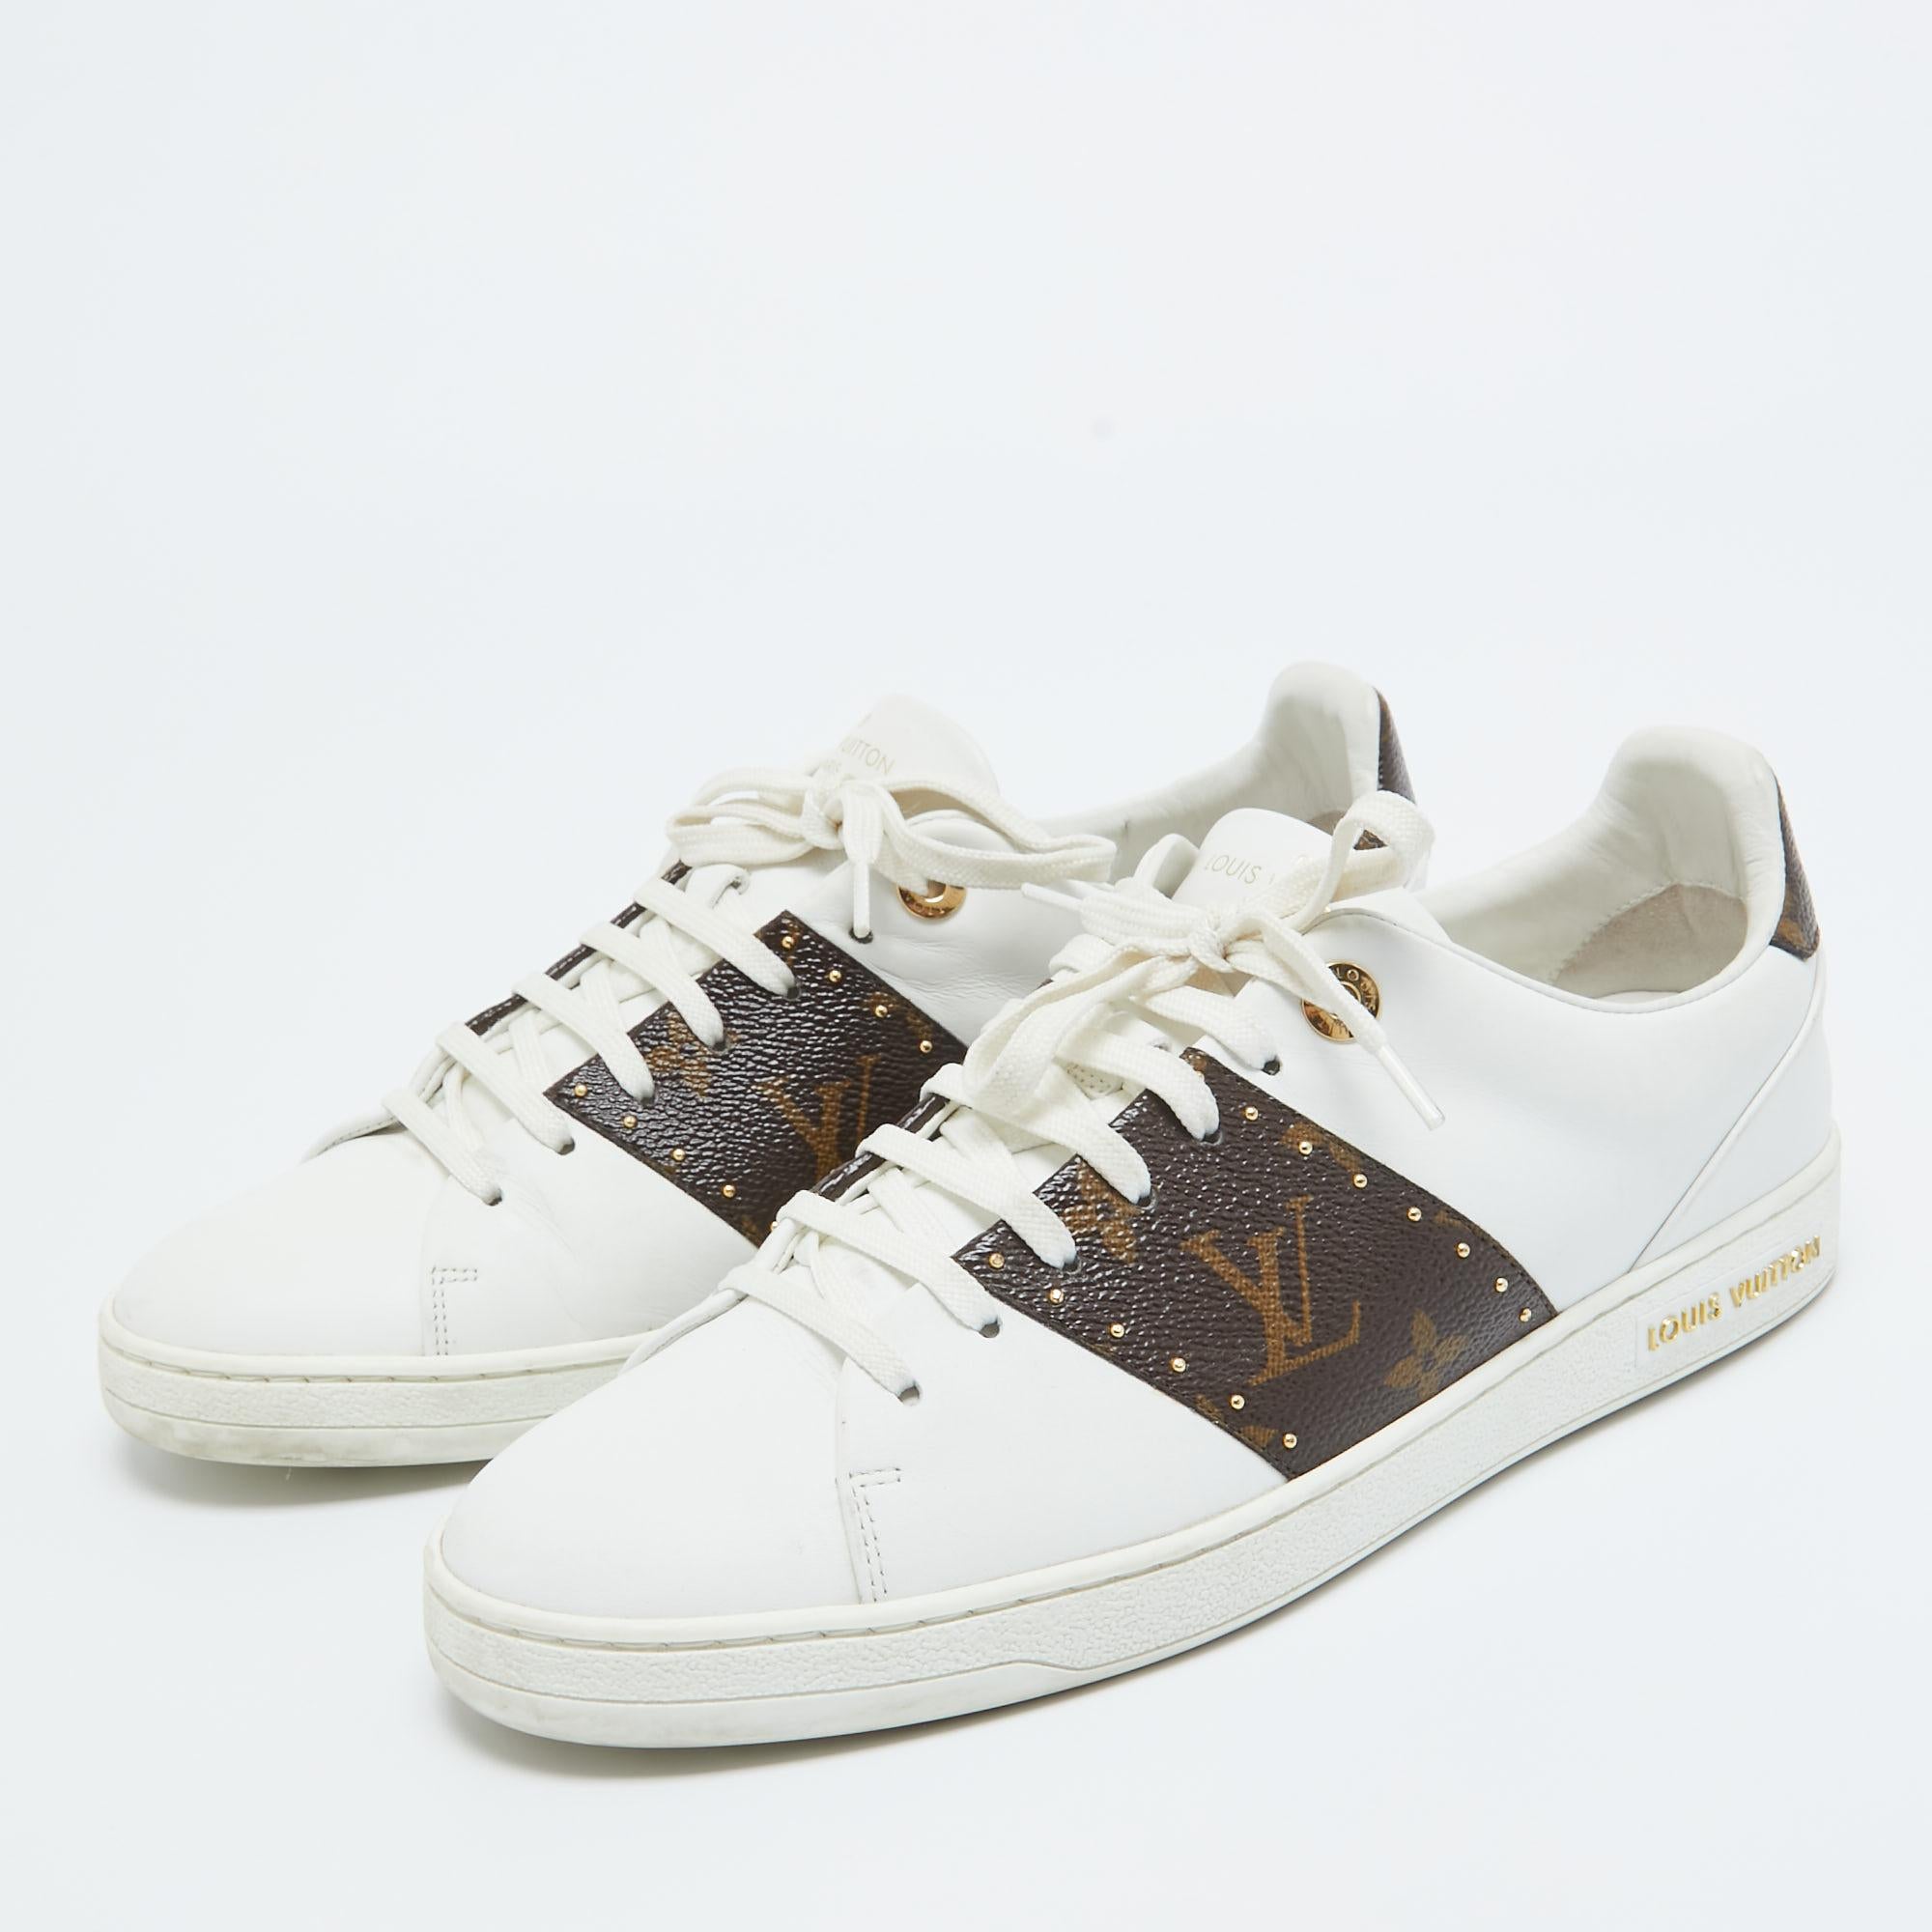 Louis Vuitton White/Brown Leather and Monogram Canvas FrontroGivw Sneakers Size  3